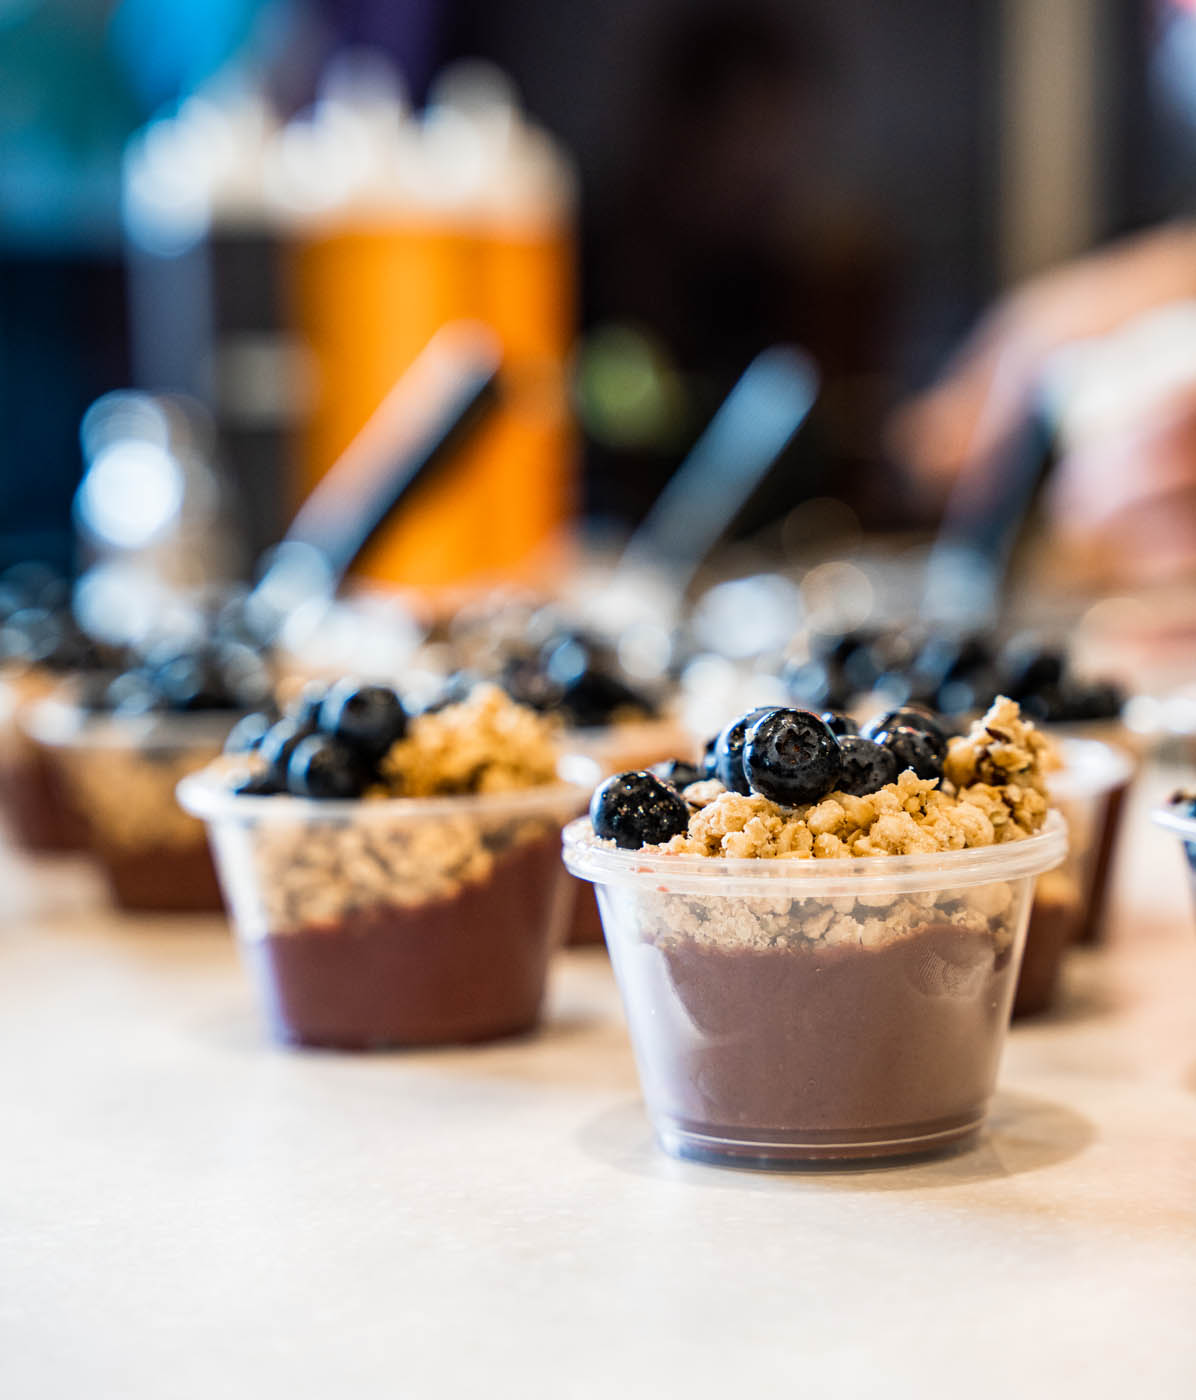 An image of delicious healthy smoothie bowls lined up in a row - bowls sold at Rush Bowls locations.